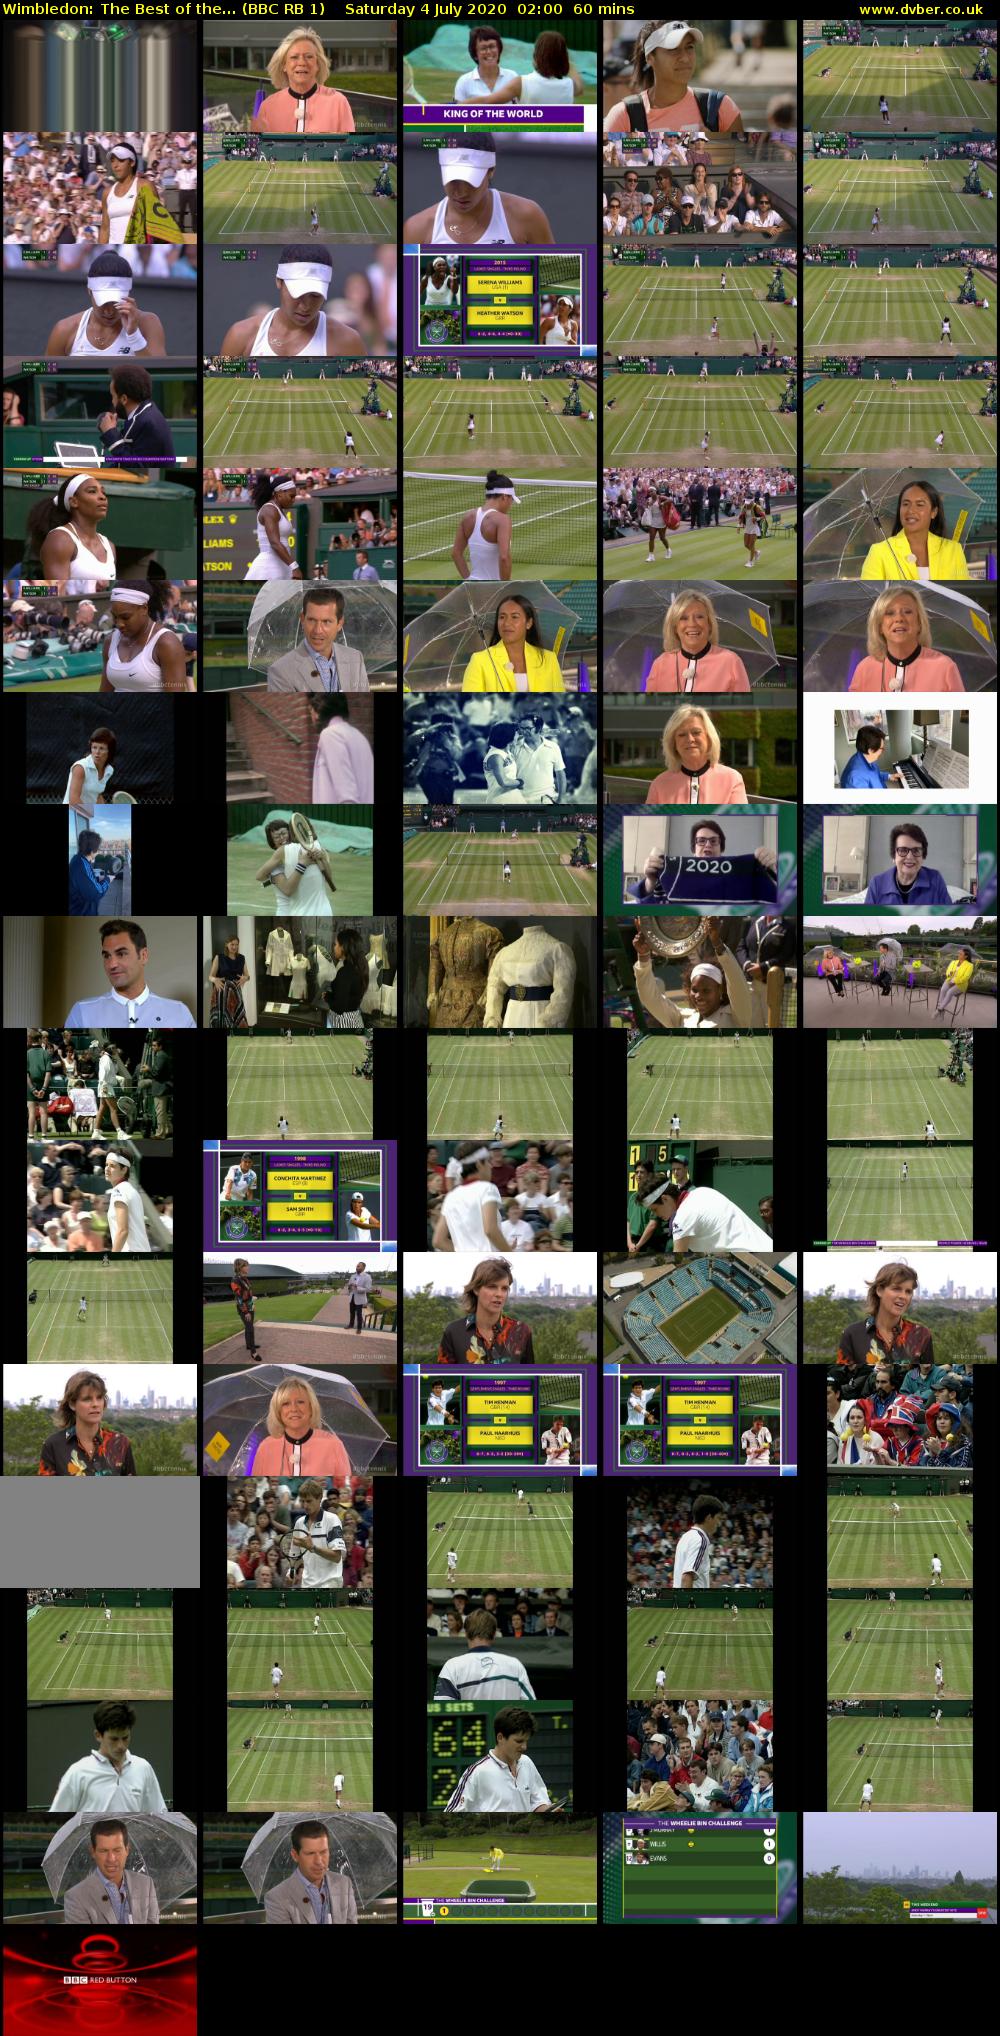 Wimbledon: The Best of the... (BBC RB 1) Saturday 4 July 2020 02:00 - 03:00